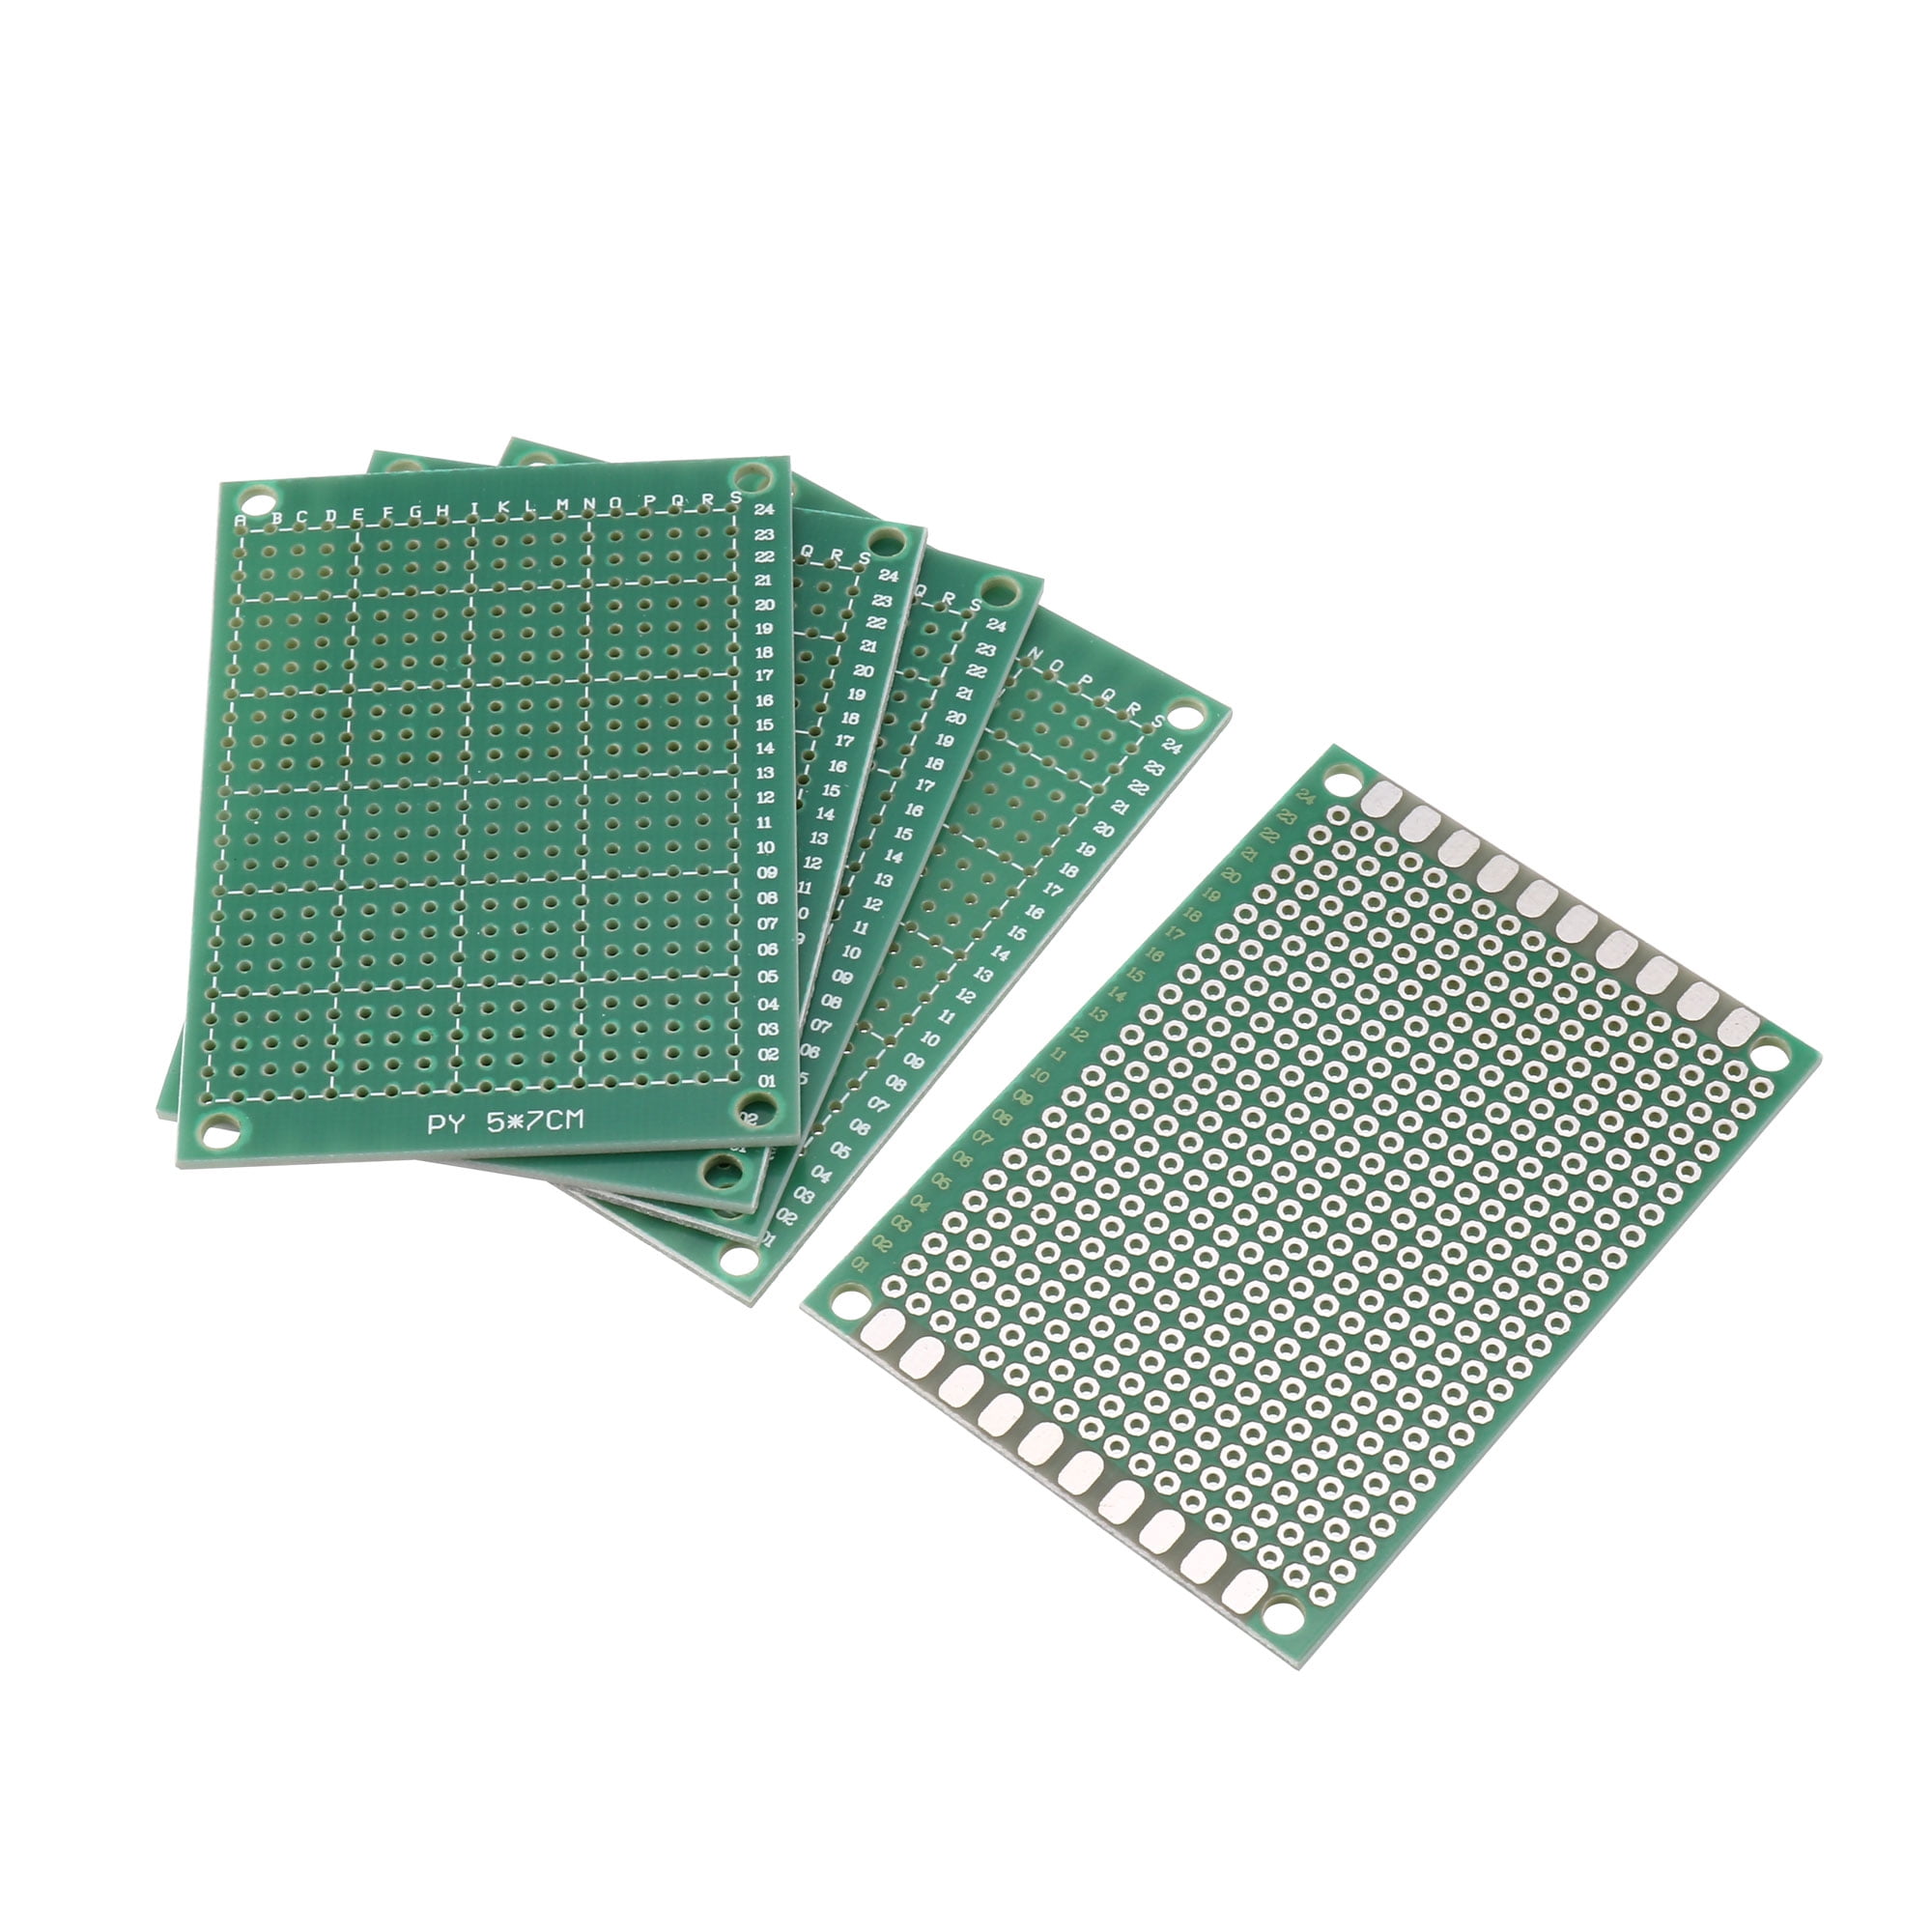 uxcell 5x7cm Single Sided Universal Printed Circuit Board for DIY Soldering 5pcs 